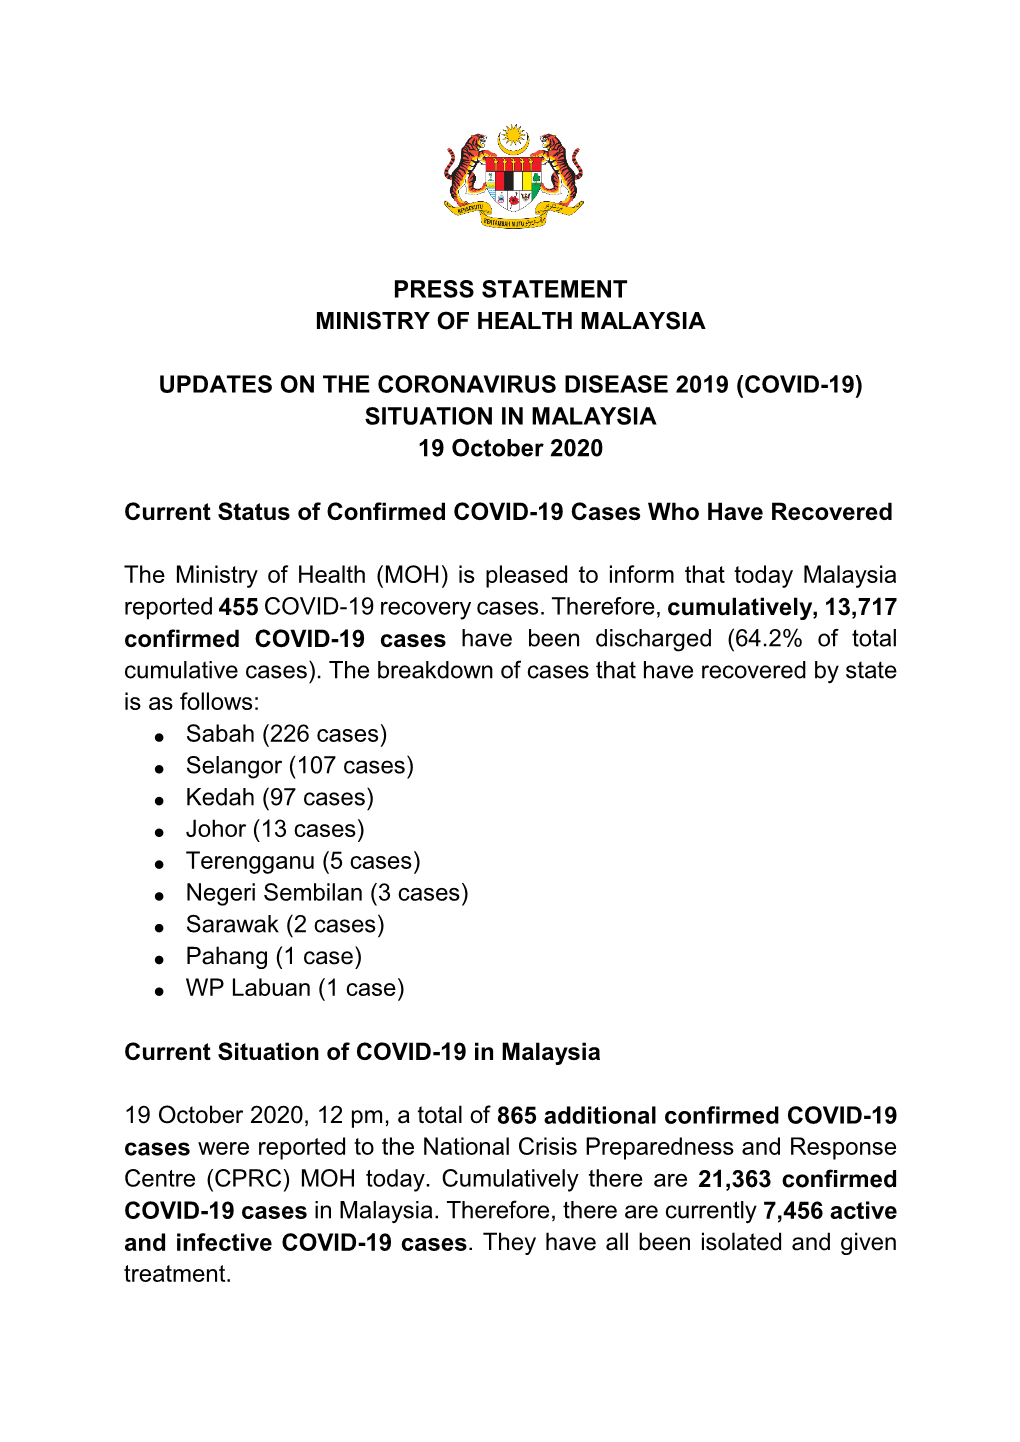 (COVID-19) SITUATION in MALAYSIA 19 October 2020